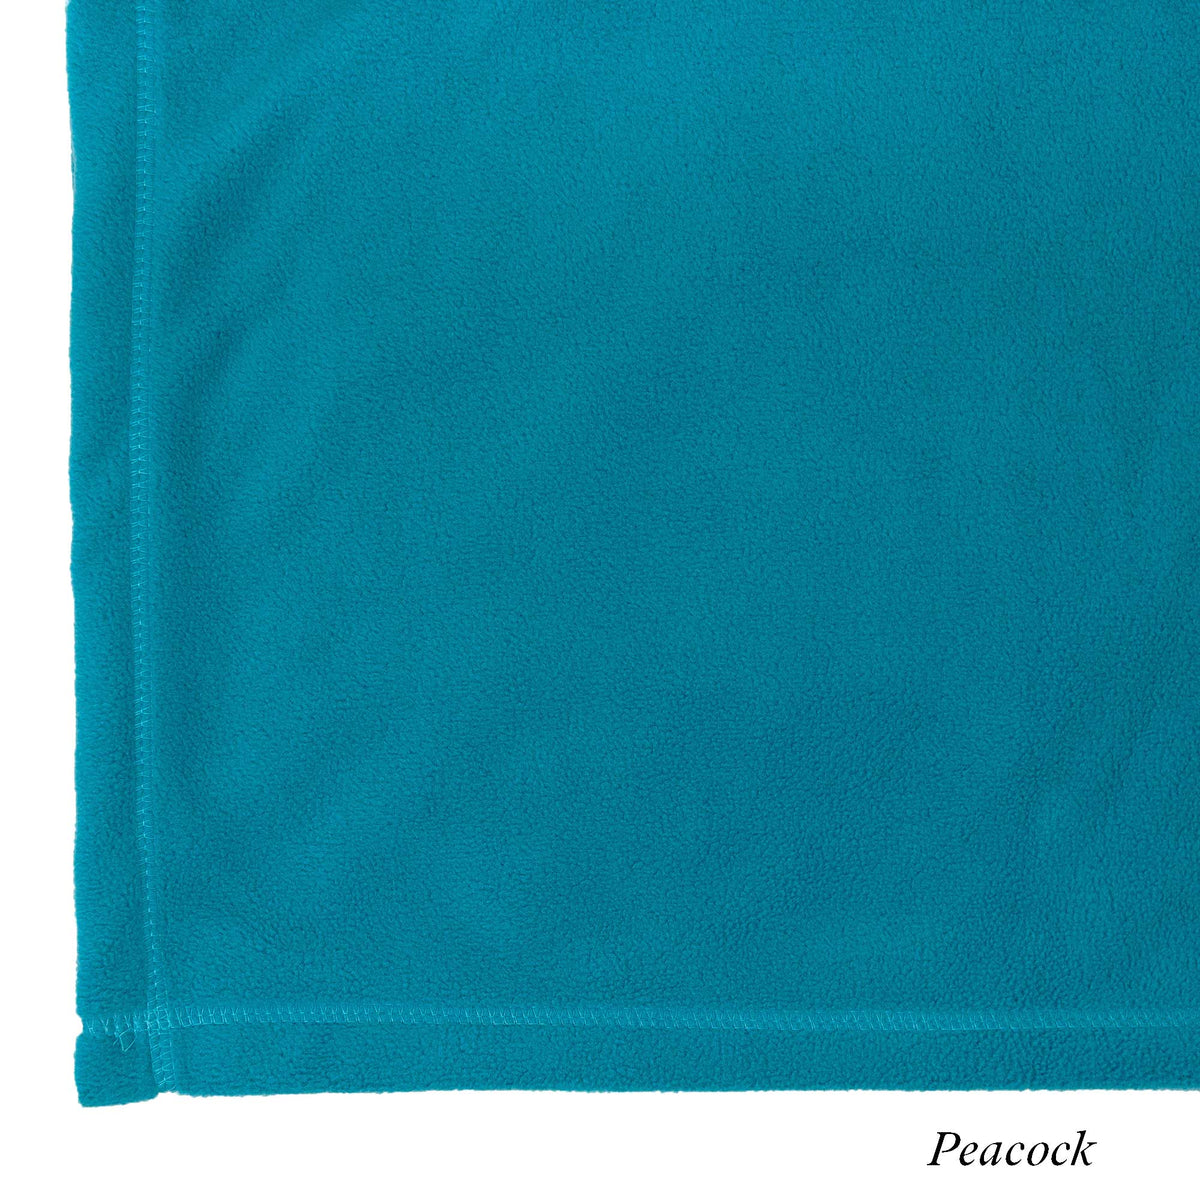 Peacock -  Biggest Picnic Blankets - Peaceful Touch - American Blanket Company